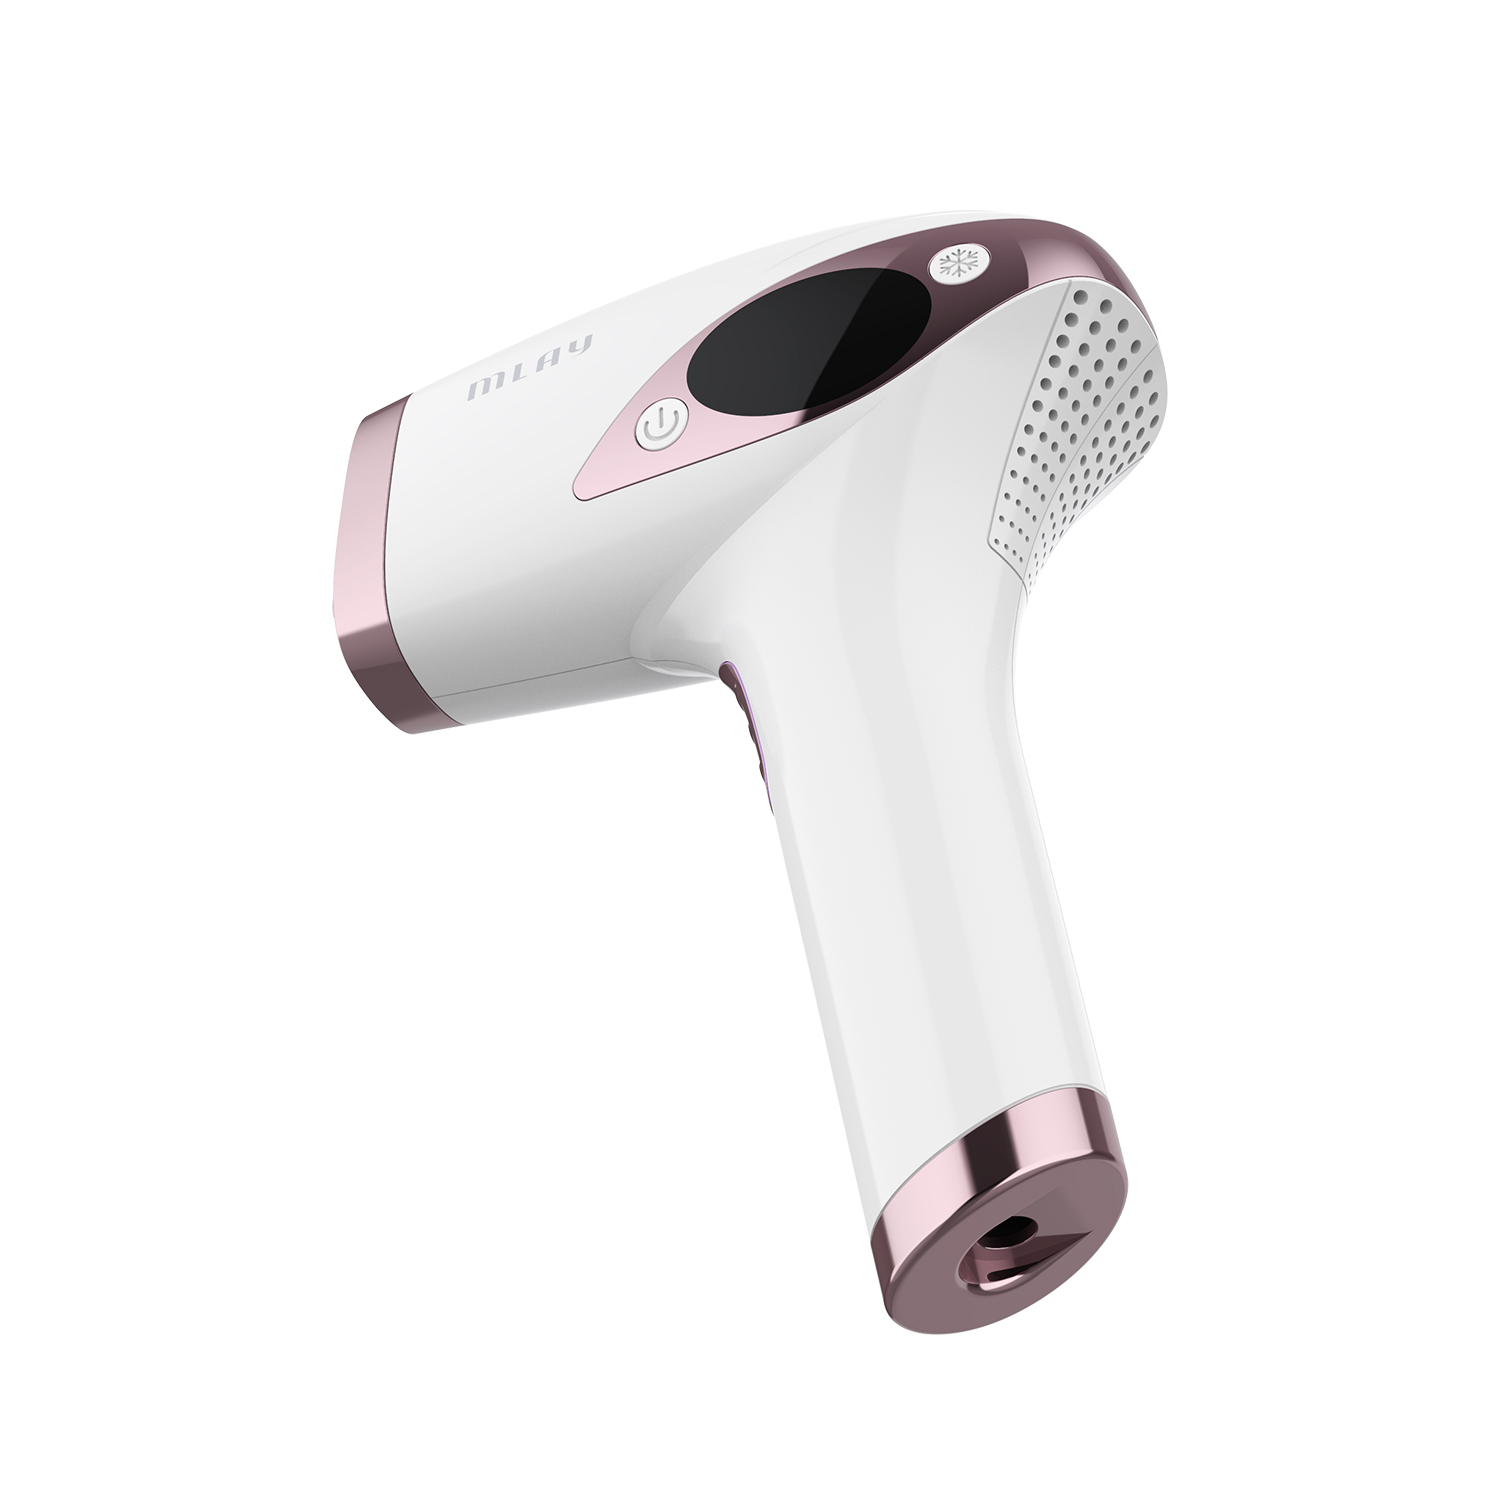 Handheld Home Use Ice Cooling Ipl Laser Hair Removal